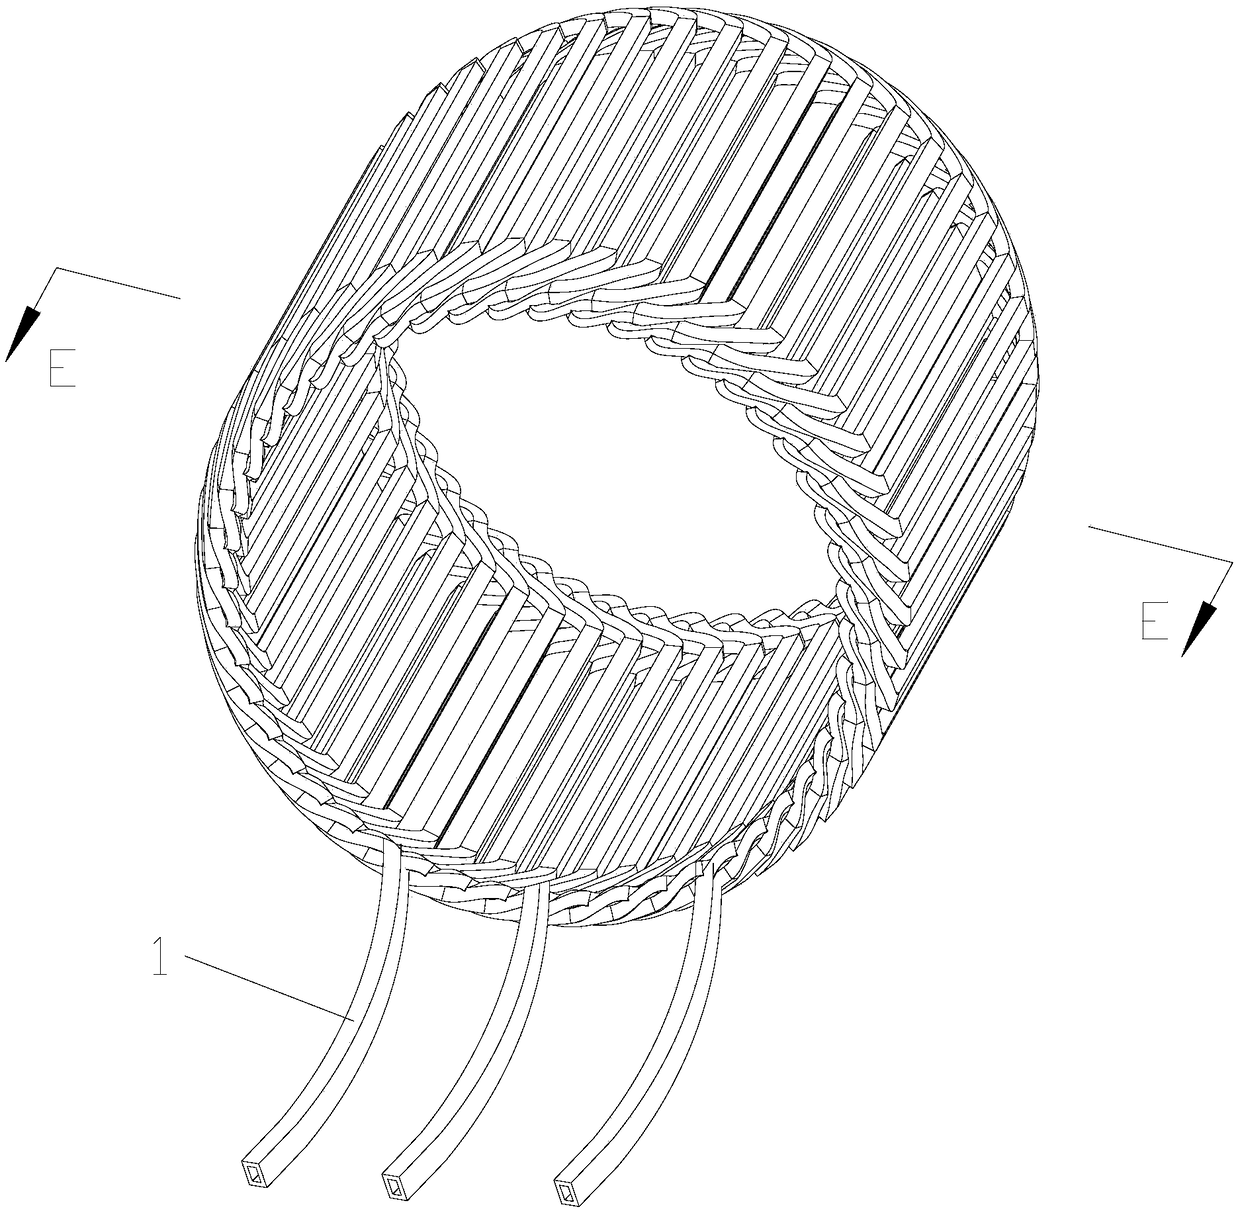 Flat wire winding, motor stator, and motor